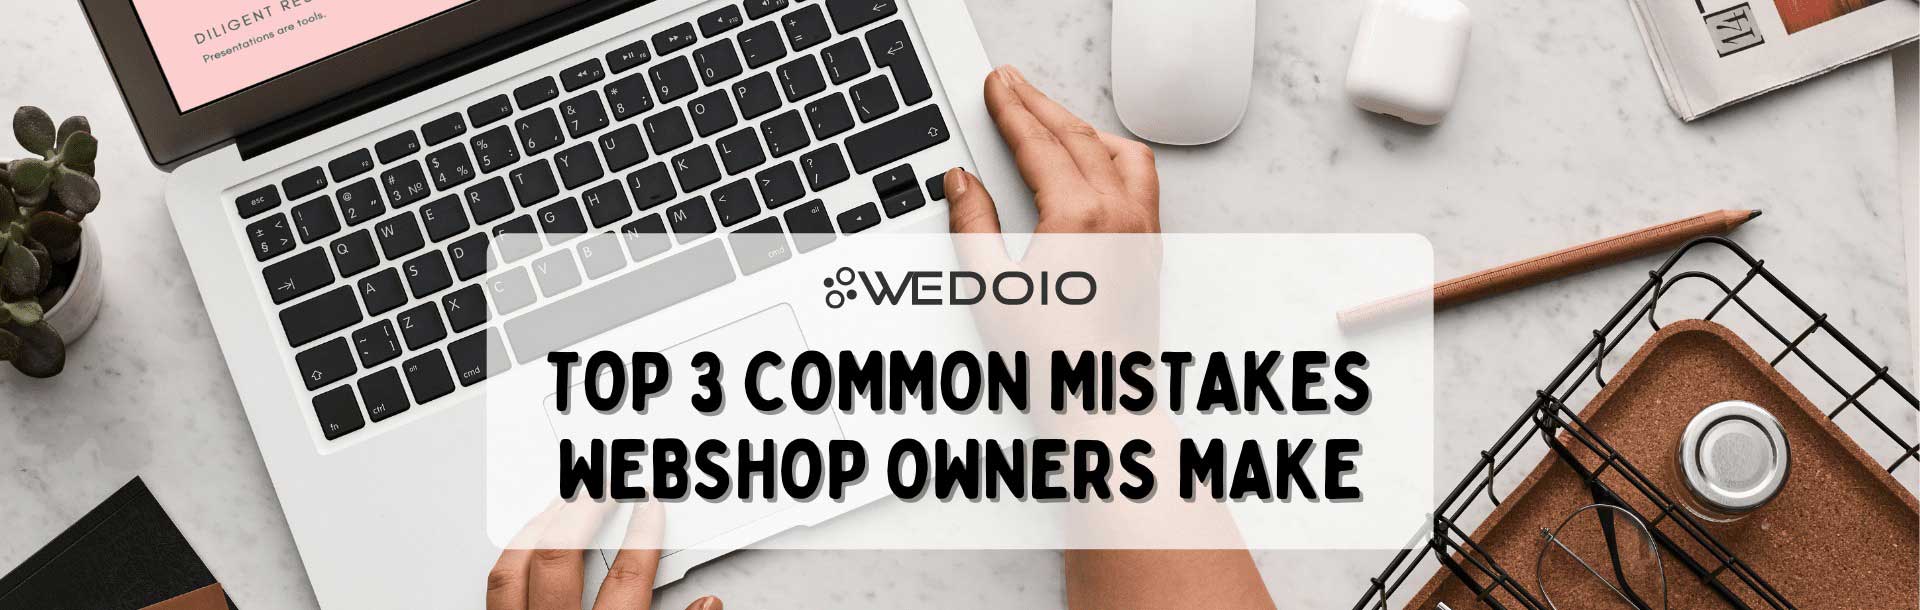 Top 3 Common Mistakes Webshop Owners Make